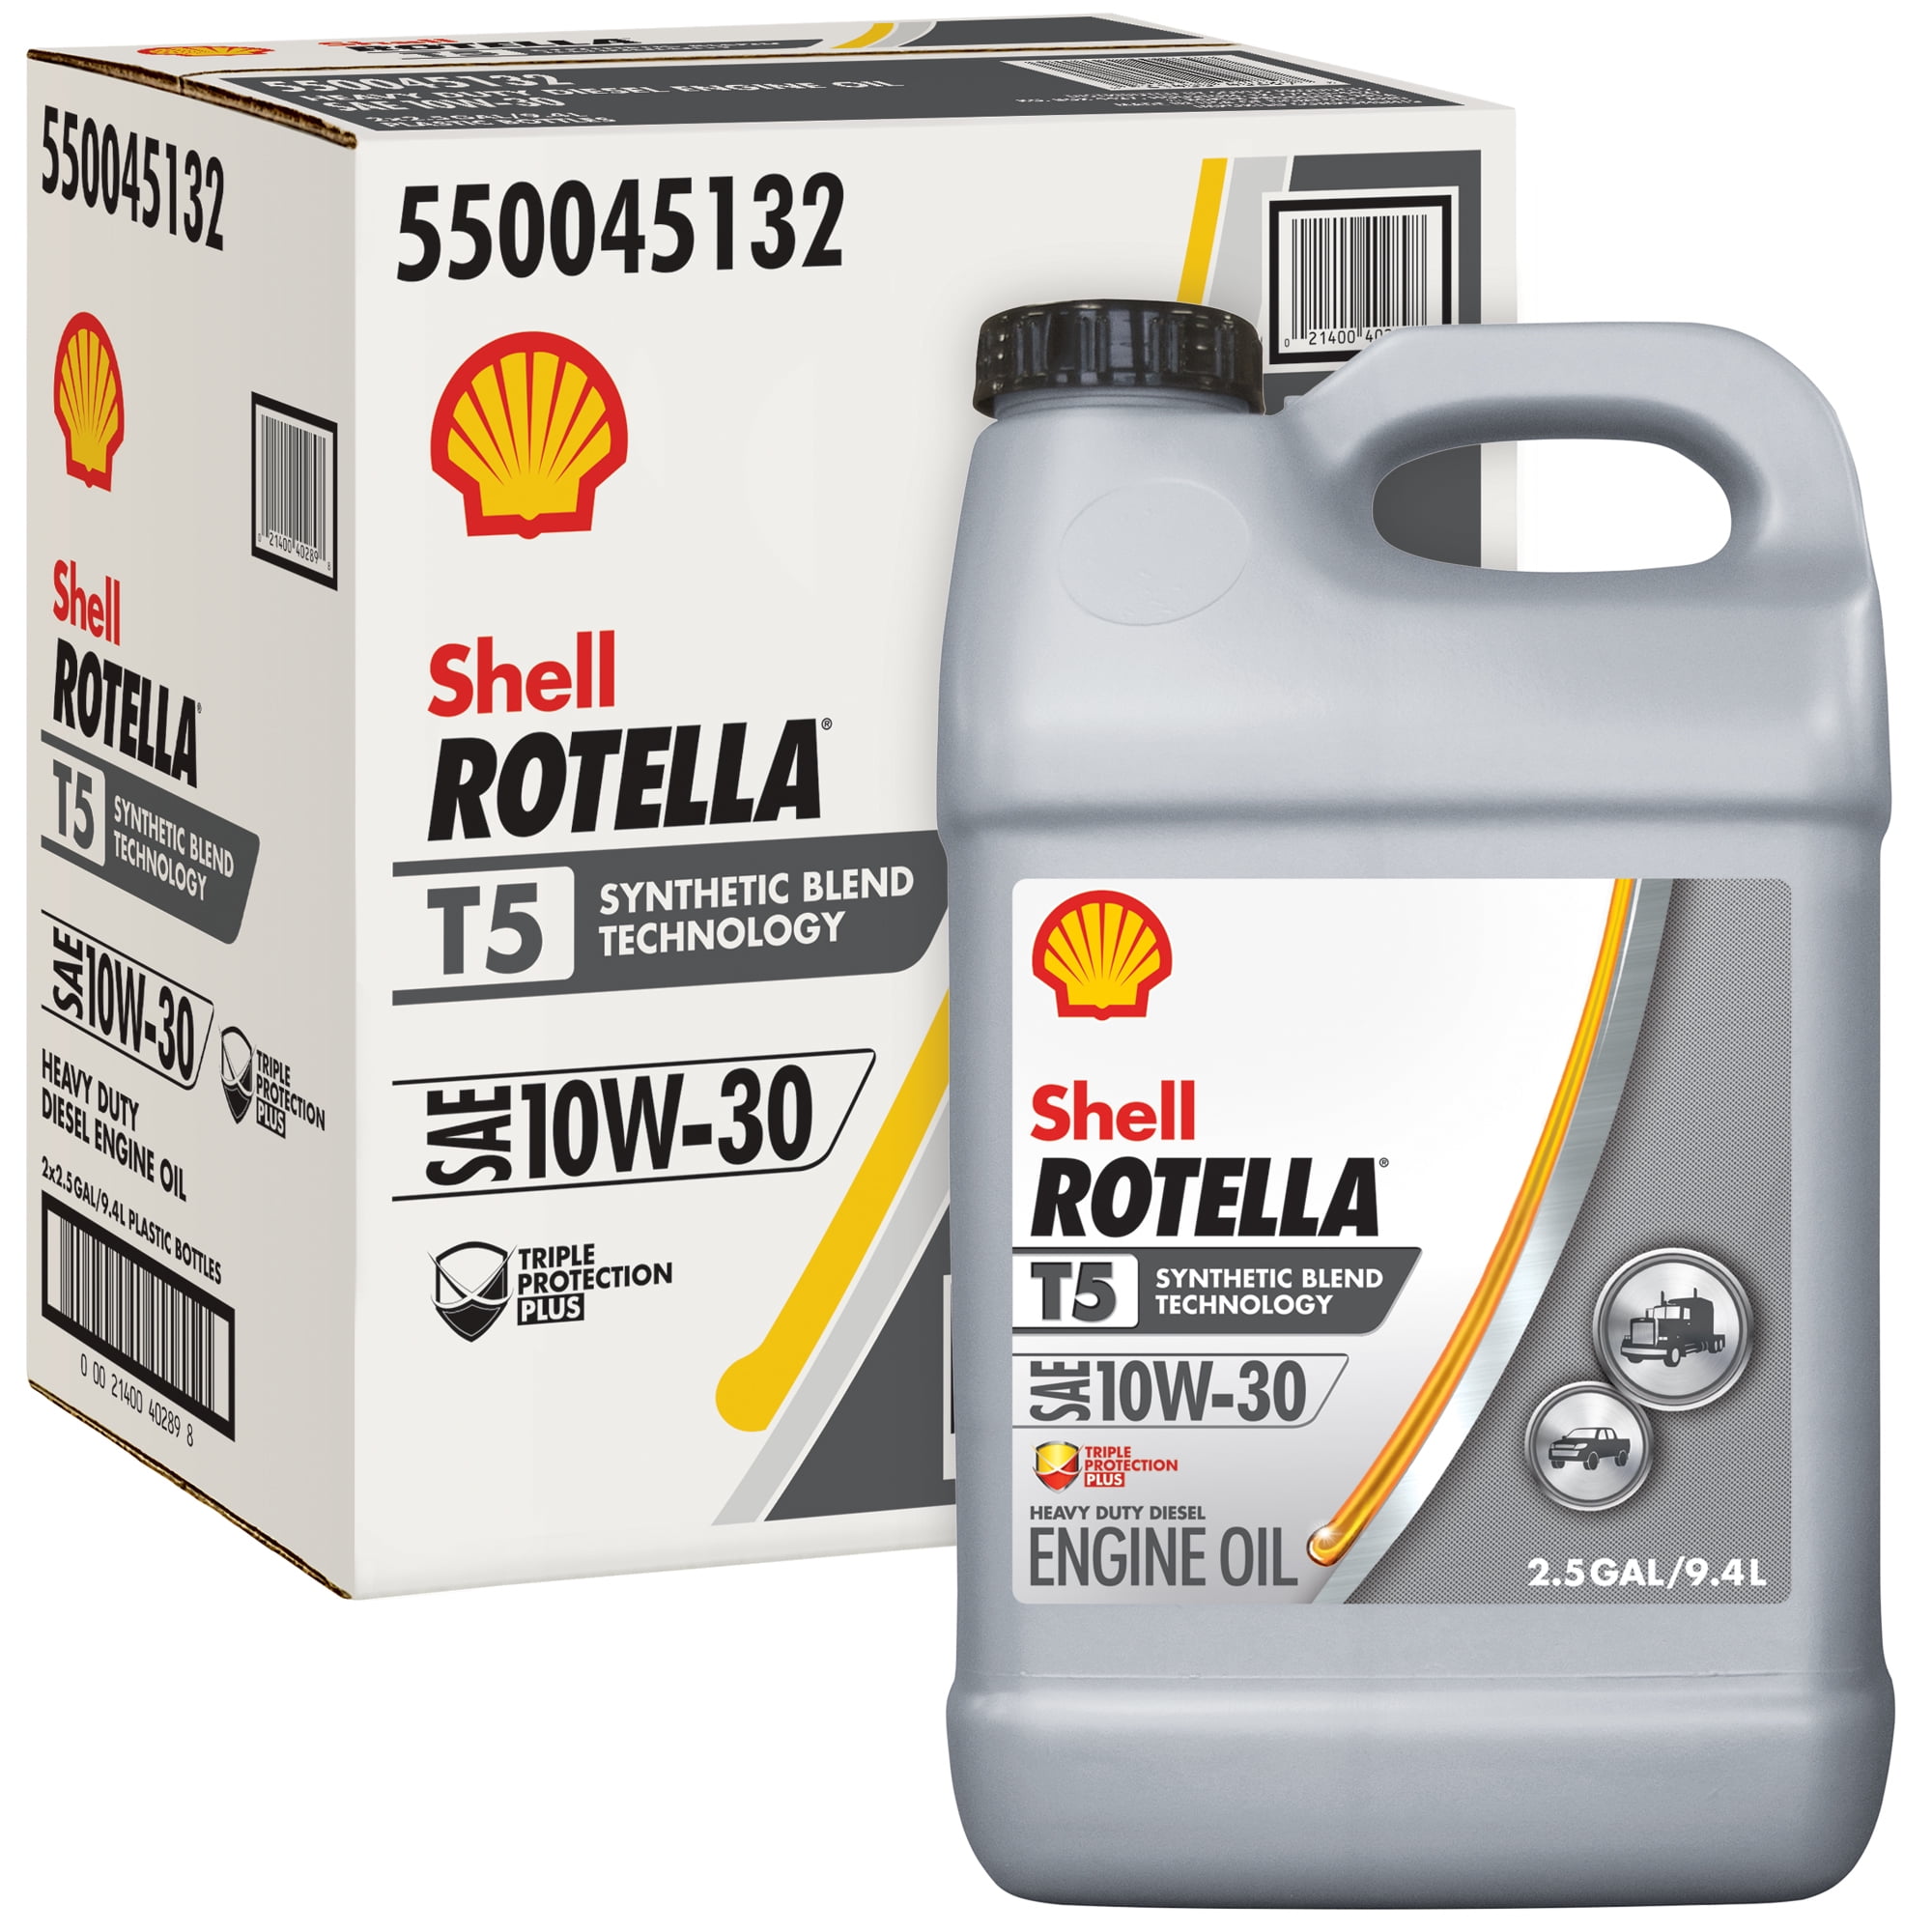 shell-rotella-t5-synthetic-blend-10w-30-diesel-engine-oil-2-5-gallon